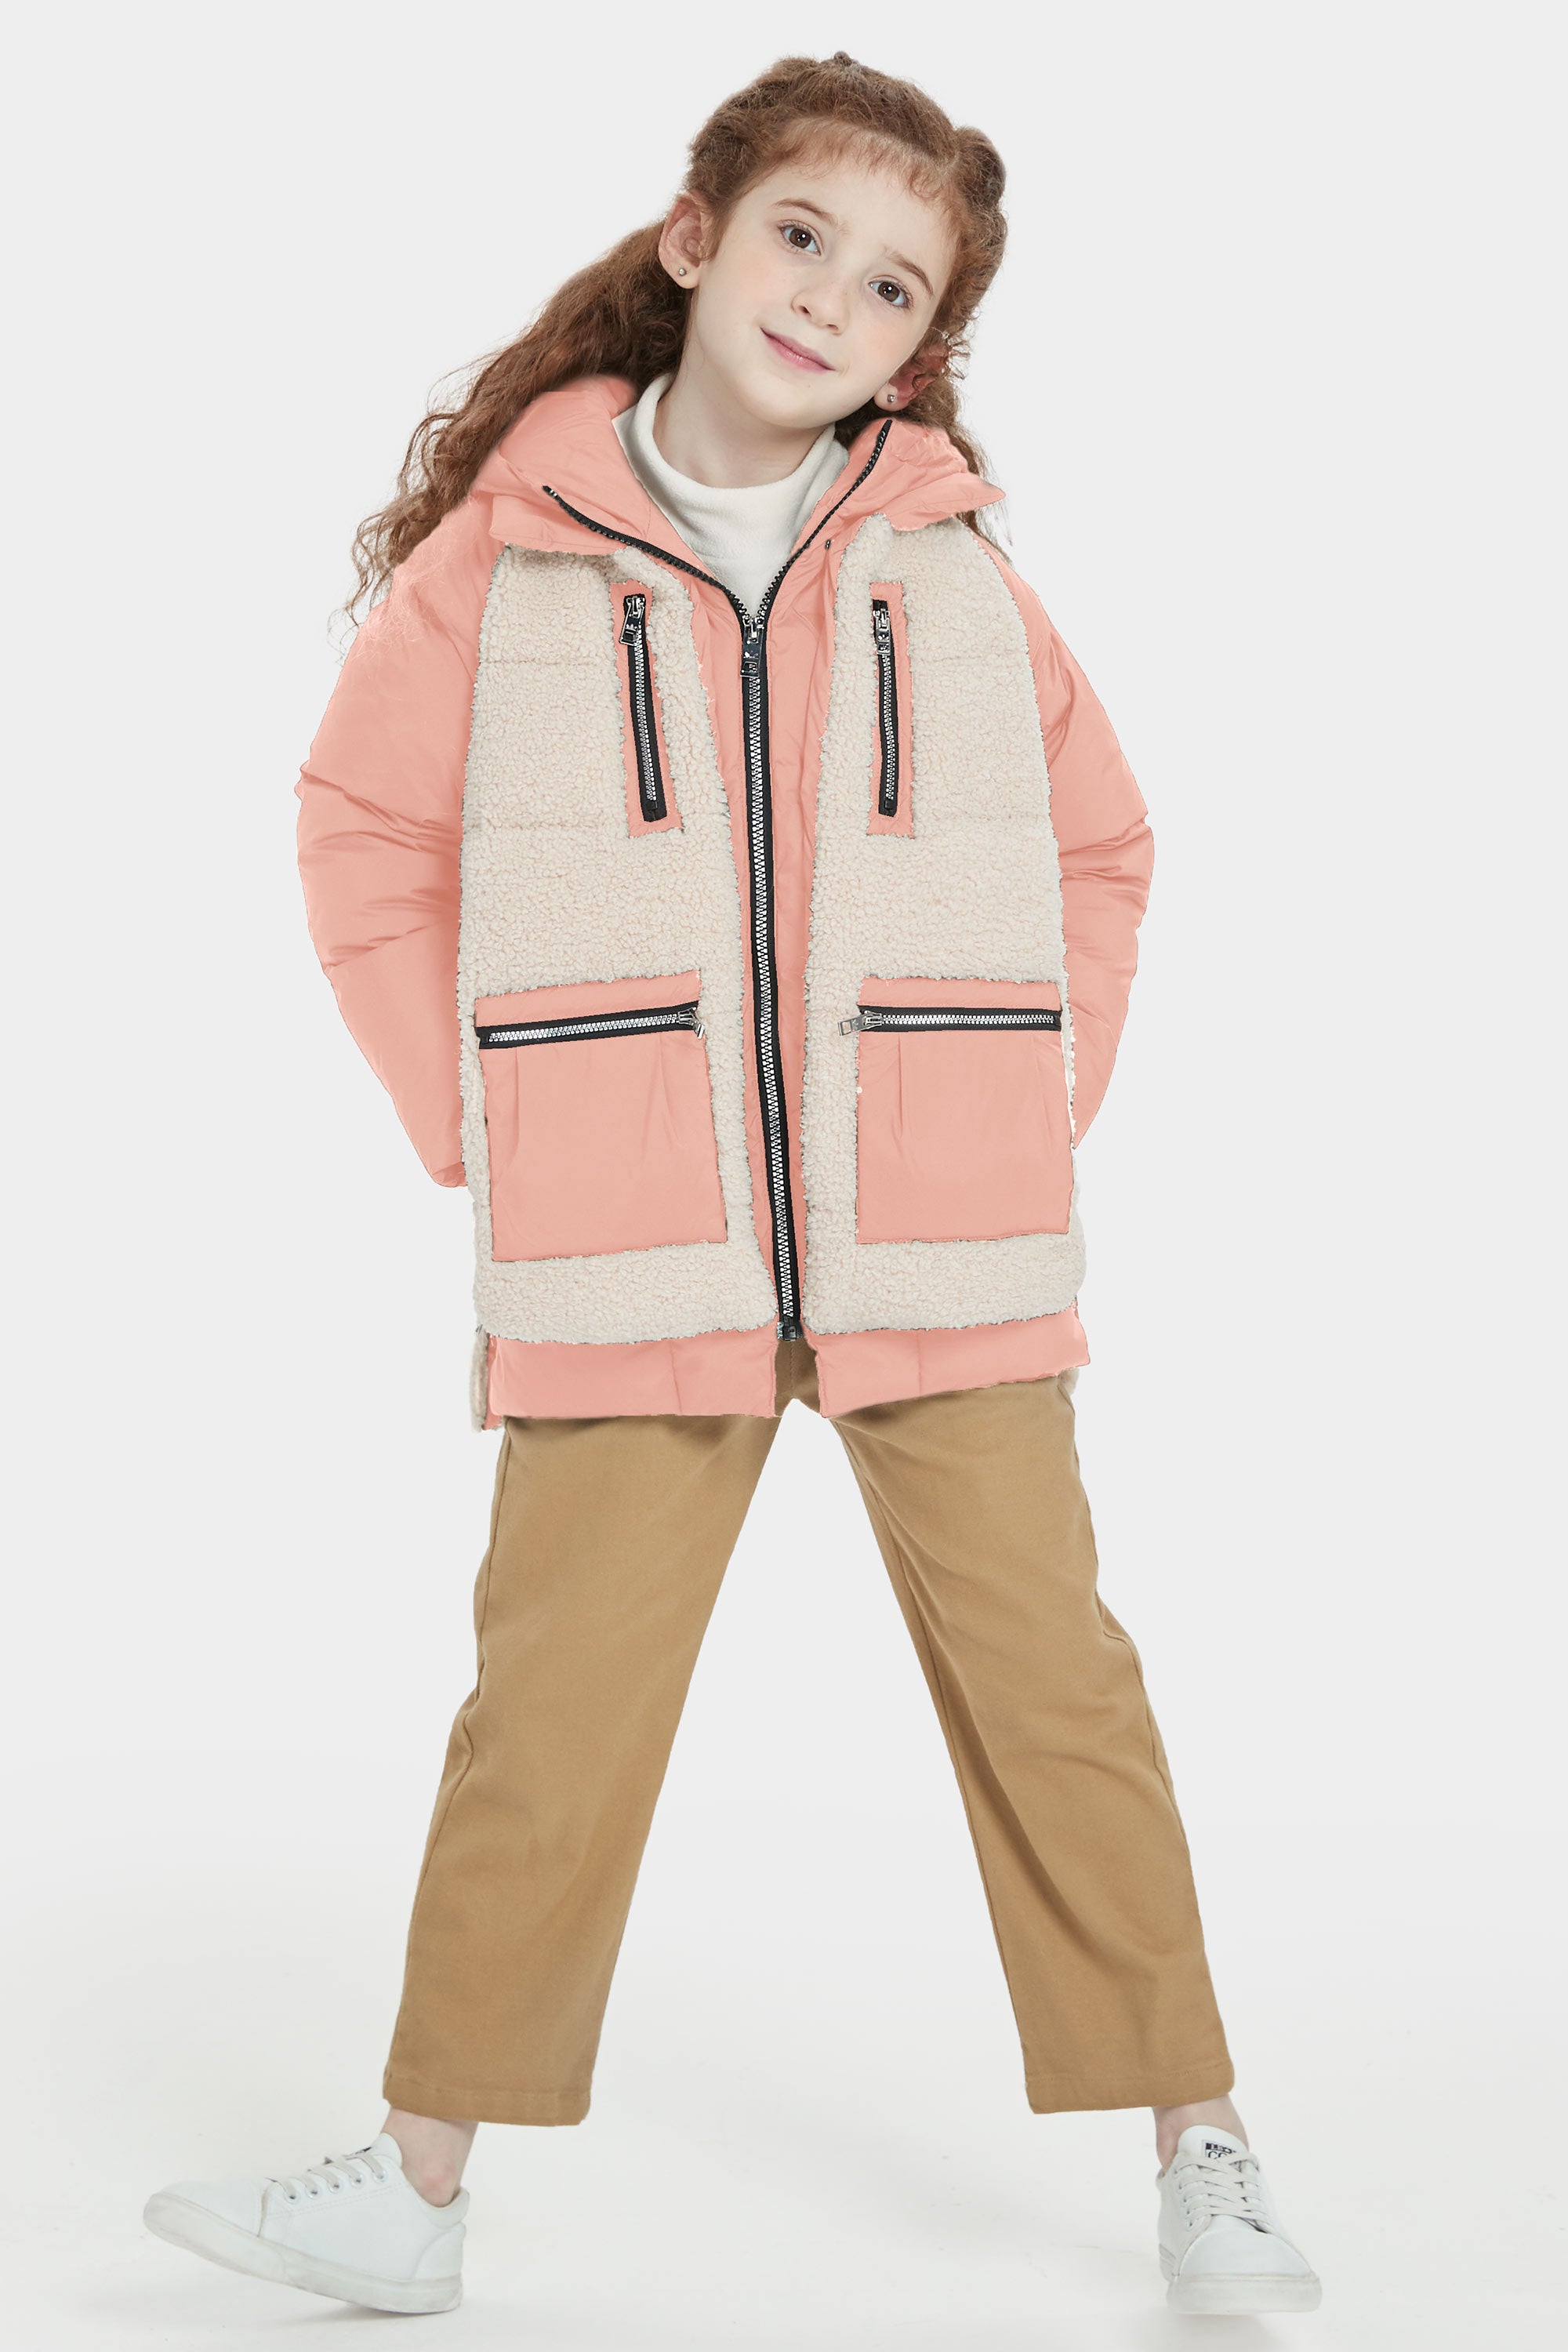 092 Universe O-Lab Children's Puffer Down Jacket with Multi Pockets